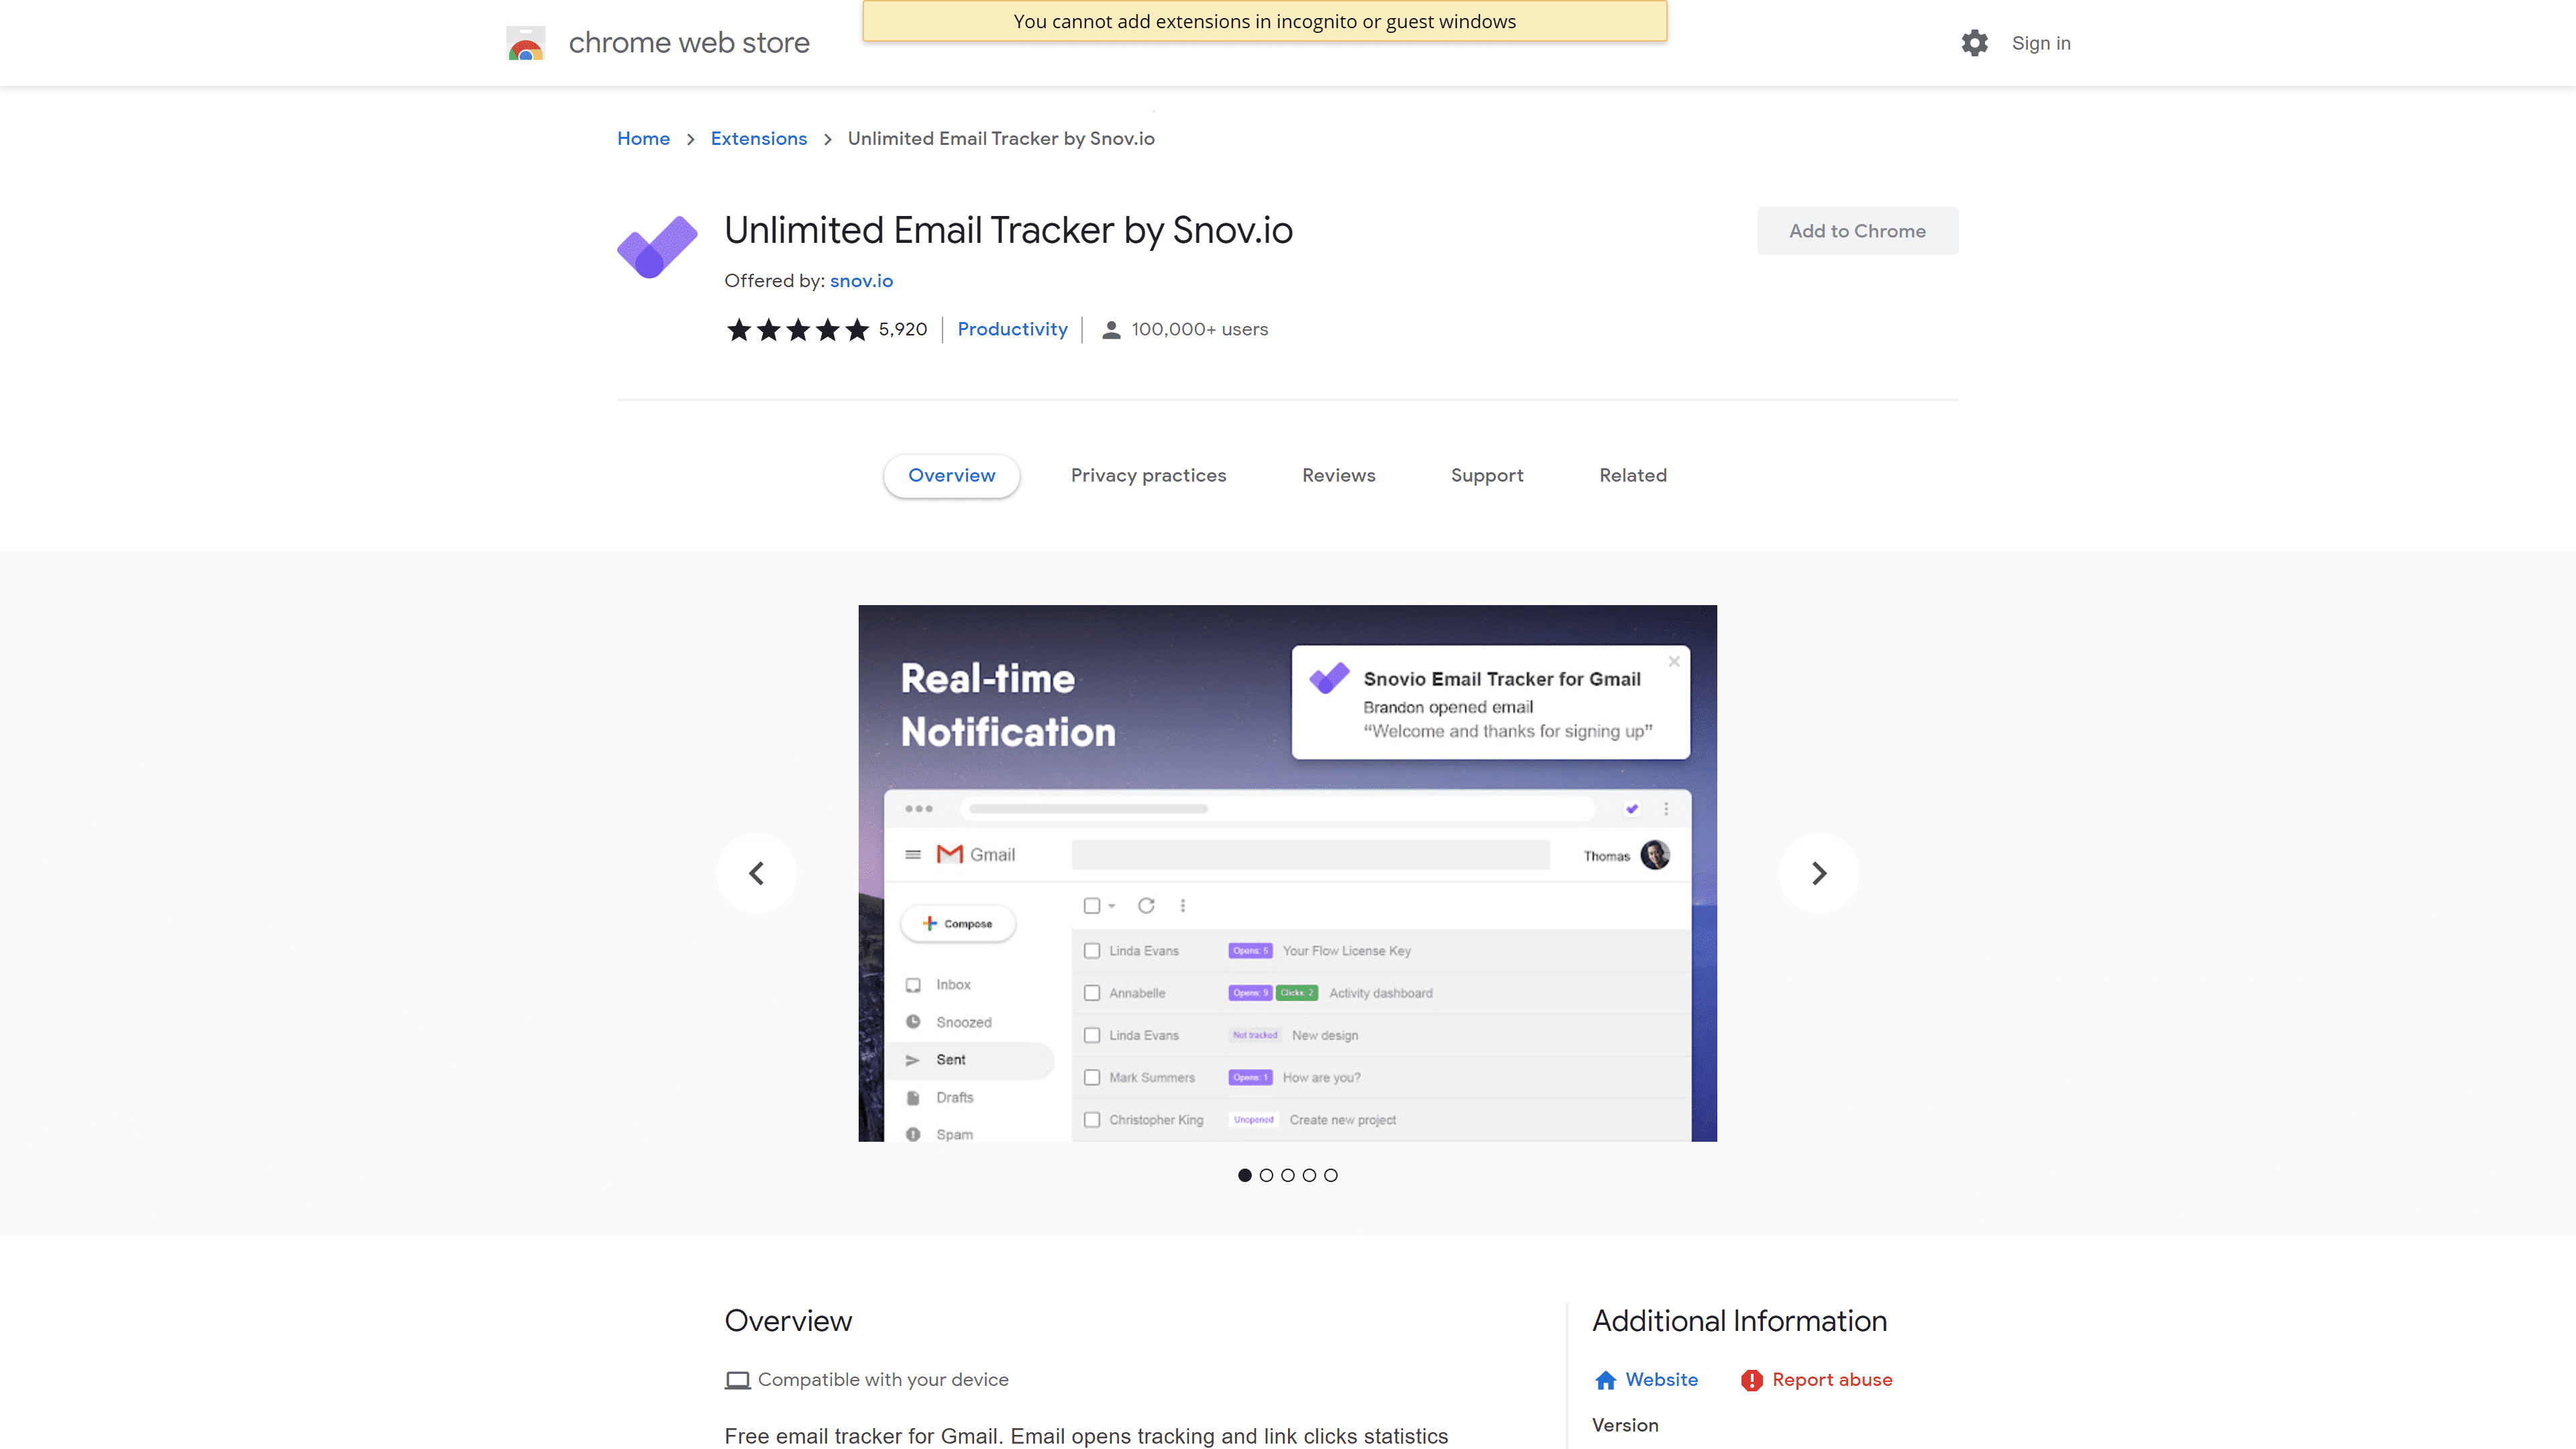 Unlimited Email Tracker by Snov.io